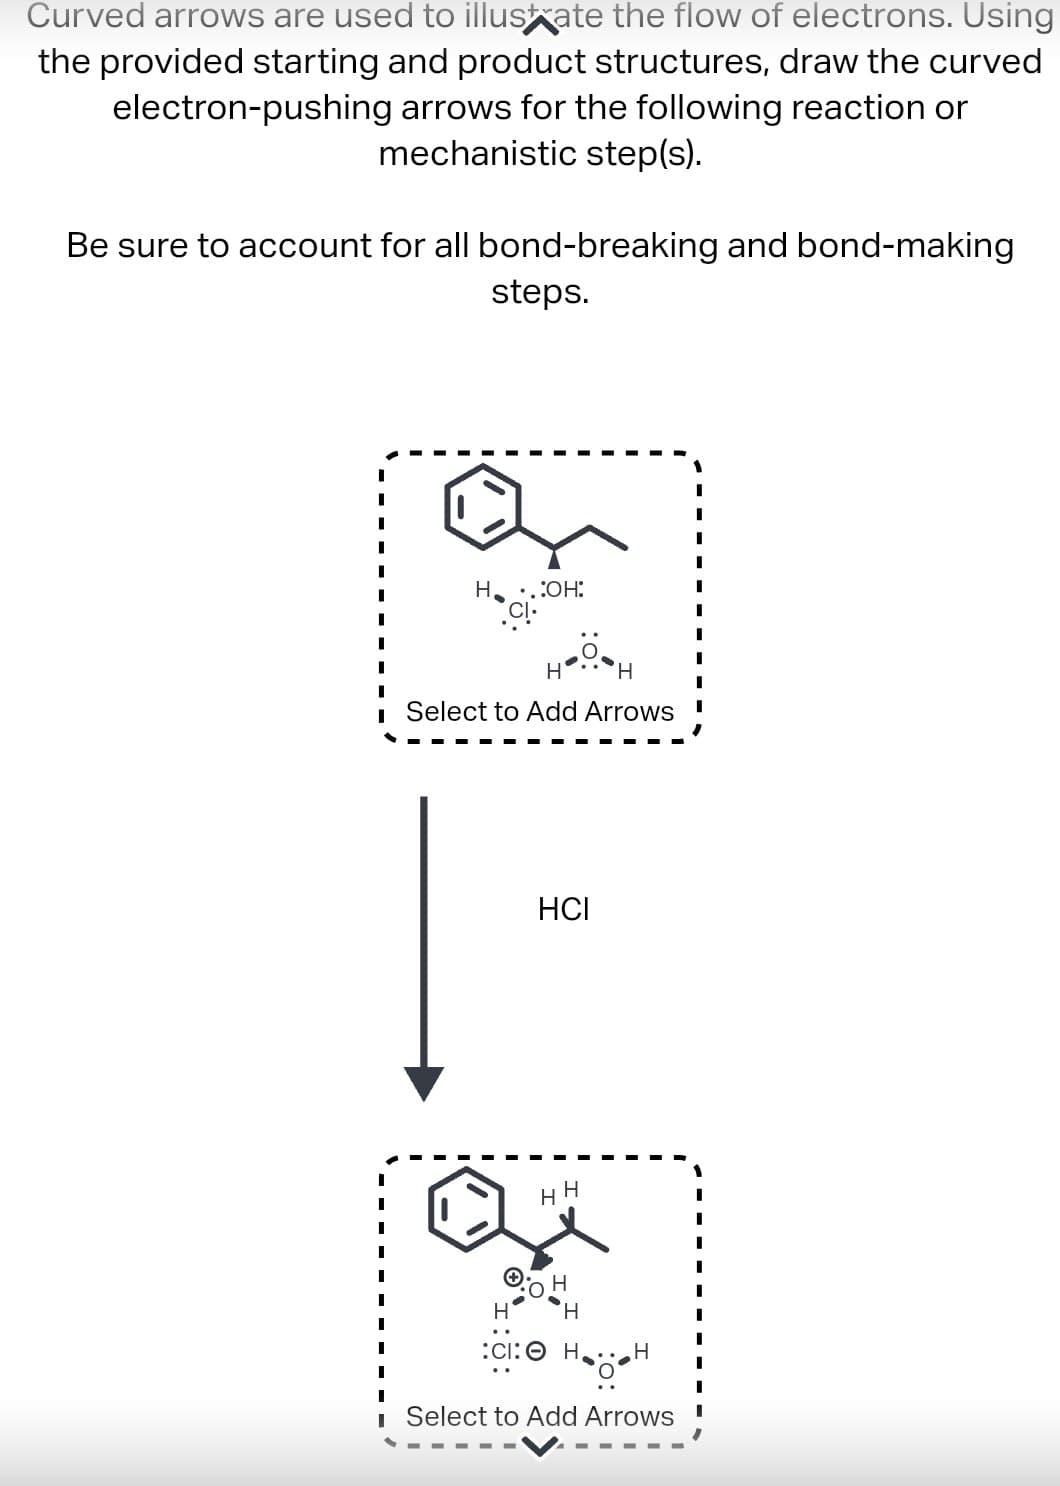 Curved arrows are used to illustrate the flow of electrons. Using
the provided starting and product structures, draw the curved
electron-pushing arrows for the following reaction or
mechanistic step(s).
Be sure to account for all bond-breaking and bond-making
steps.
H ..:OH:
Select to Add Arrows
HCI
H
H
H
H
H
:CI: OH,
Најан
Select to Add Arrows !